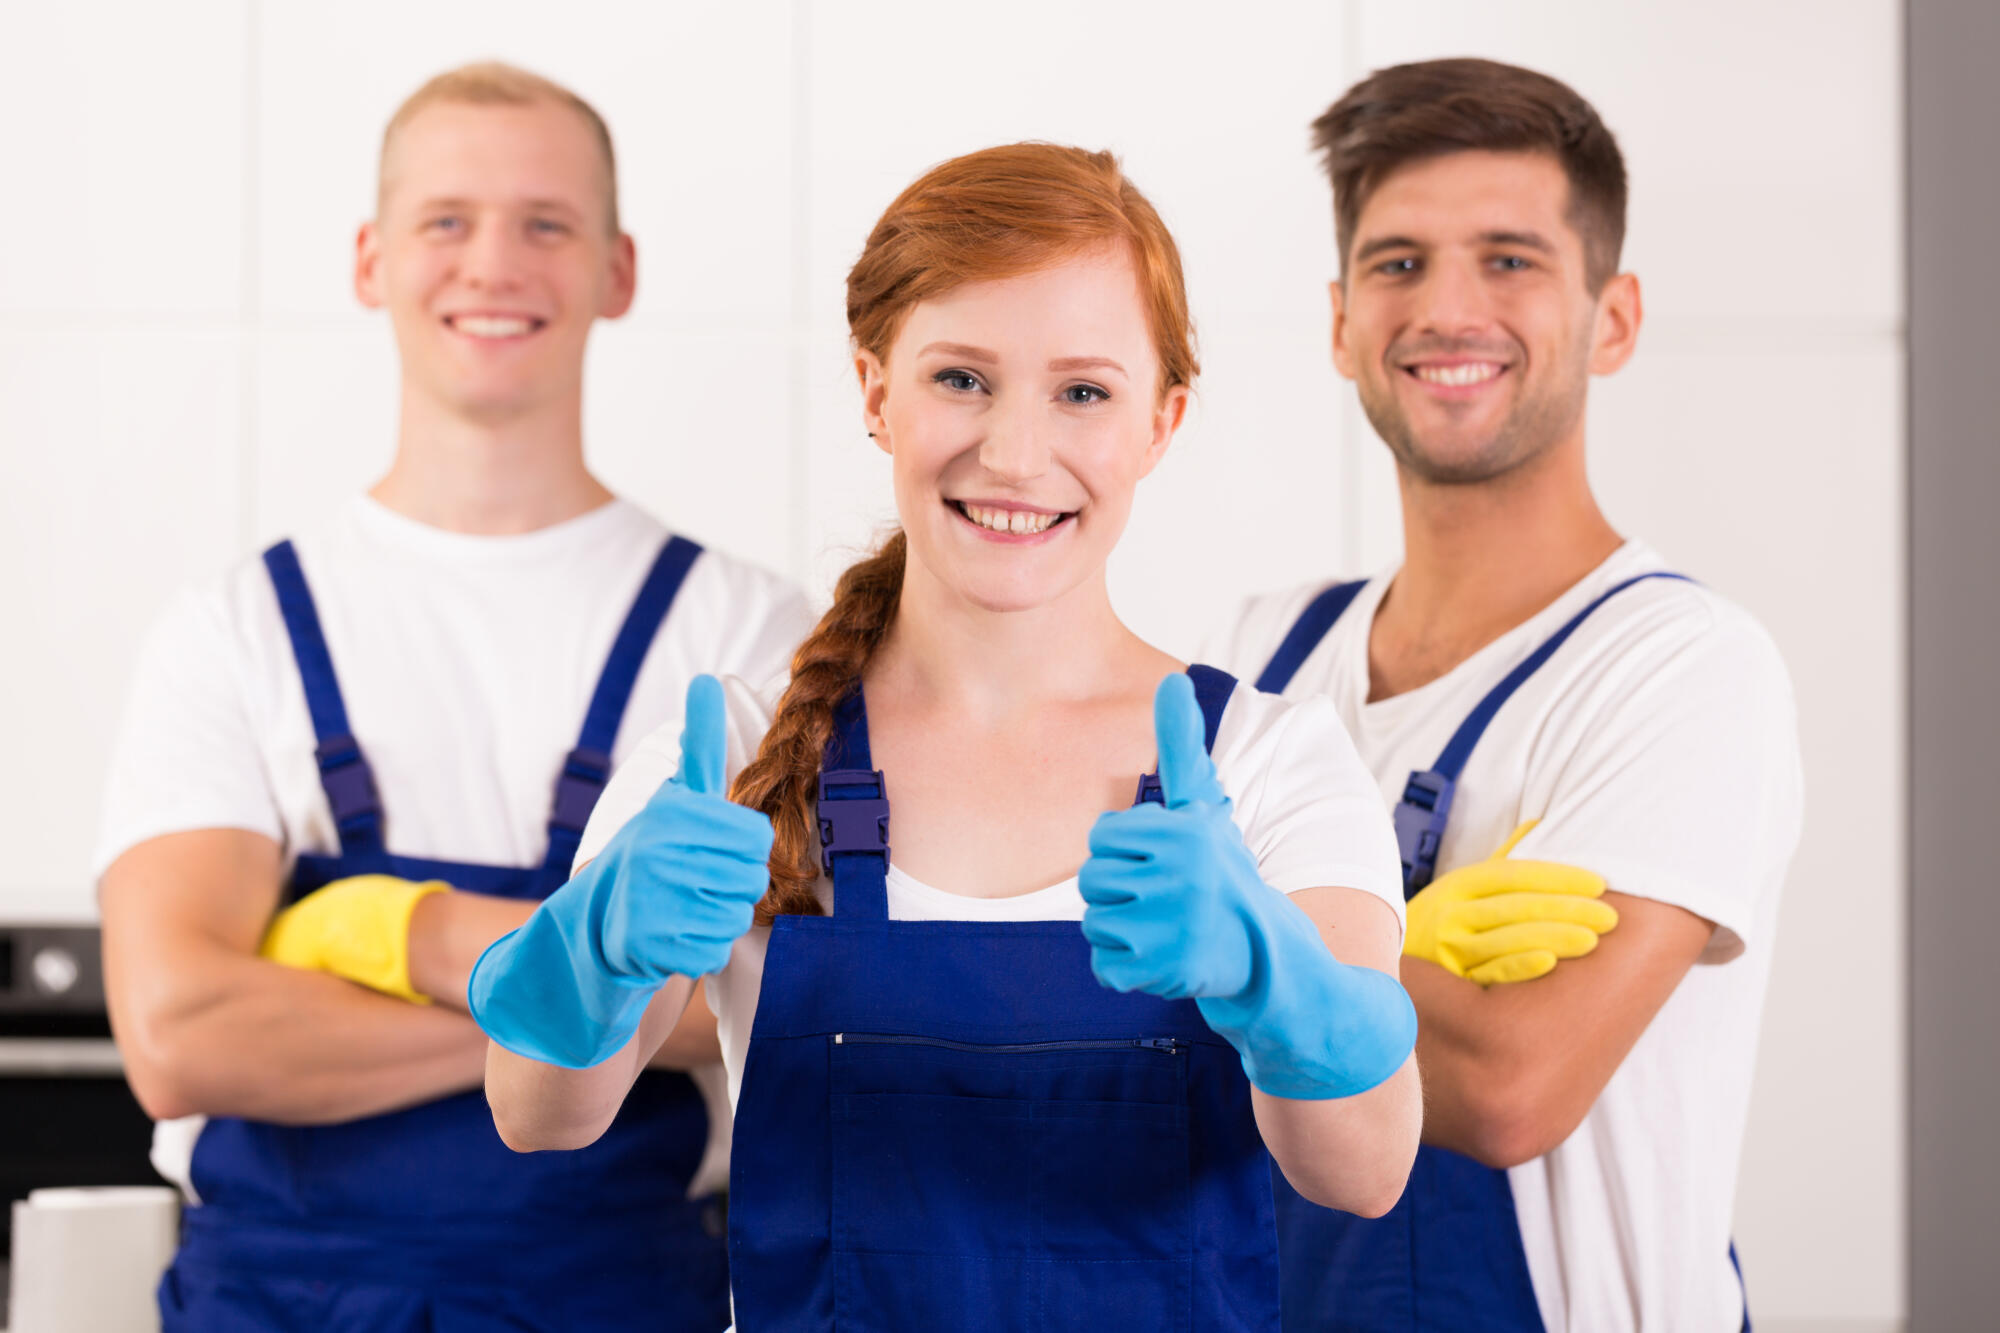 Maintaining a Clean and Sanitized Space With Specialty Cleaning Services